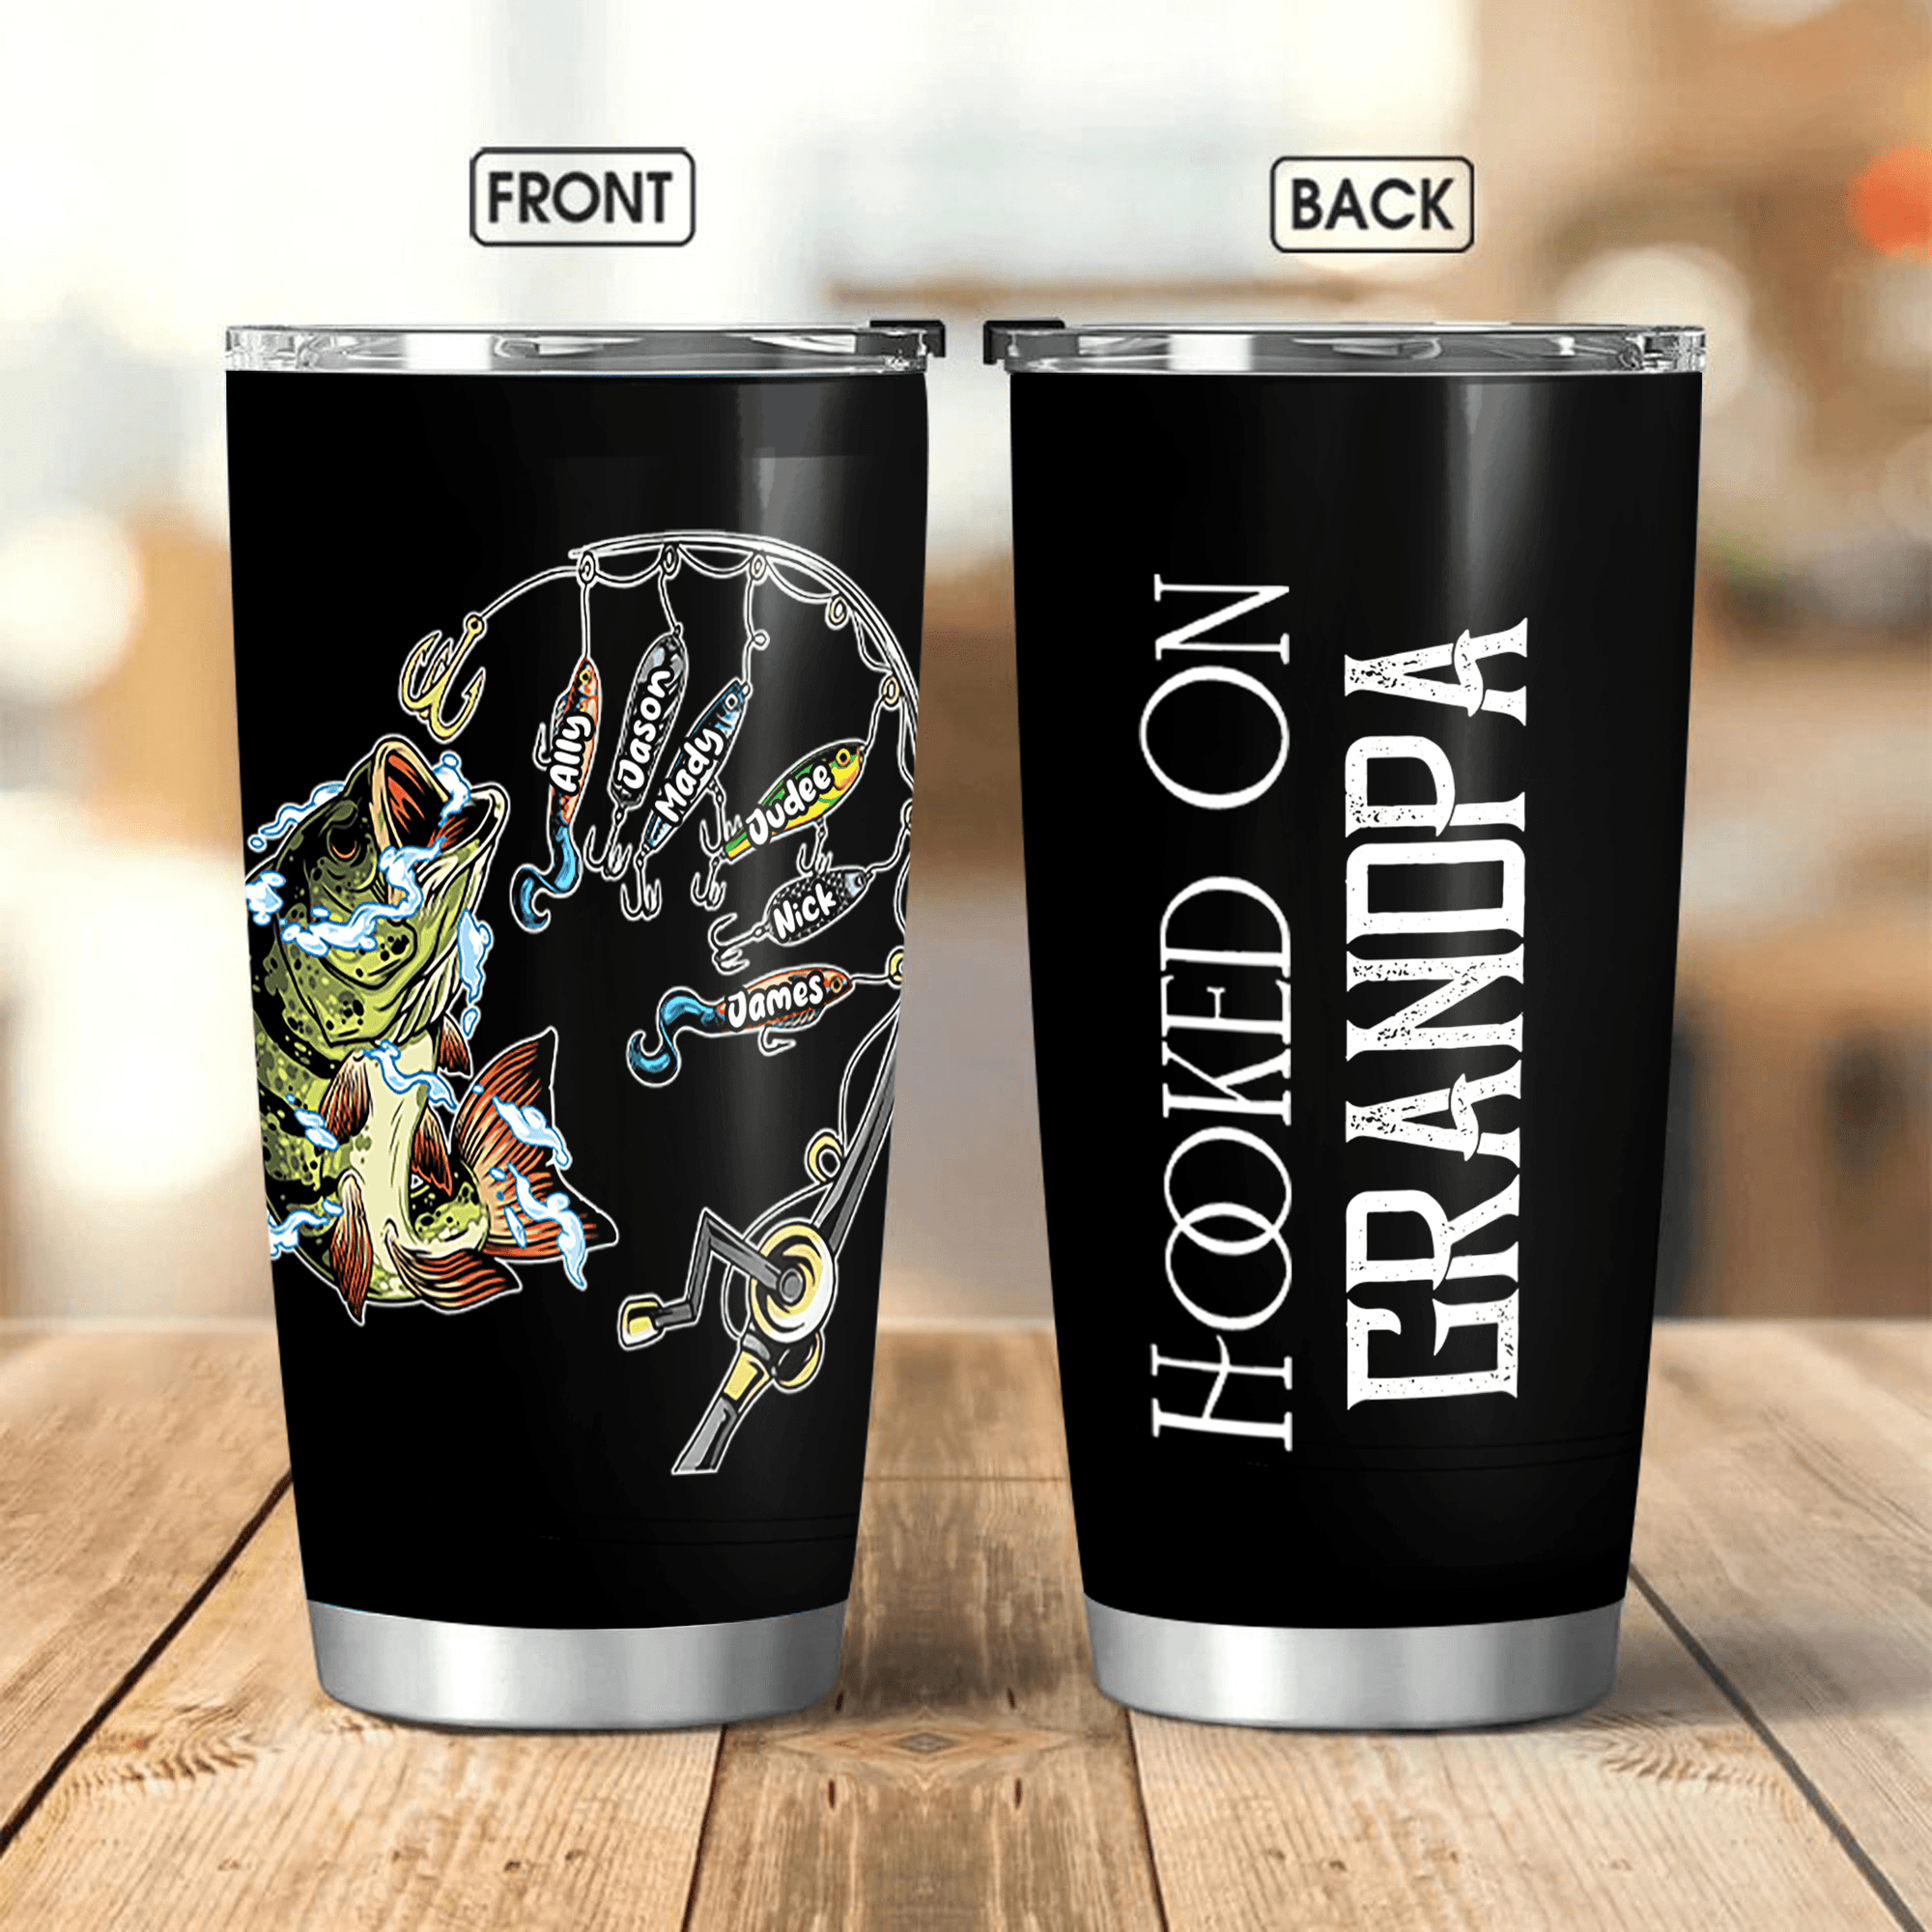 Hooked on Dad Fishing Dad Pun - Funny Fathers Day - Personalized Custom 20oz Fat Tumbler Cup - Birthday, Loving, Funny Gift for Grandfather/Dad/Father, Husband, Grandparent - Suzitee Store